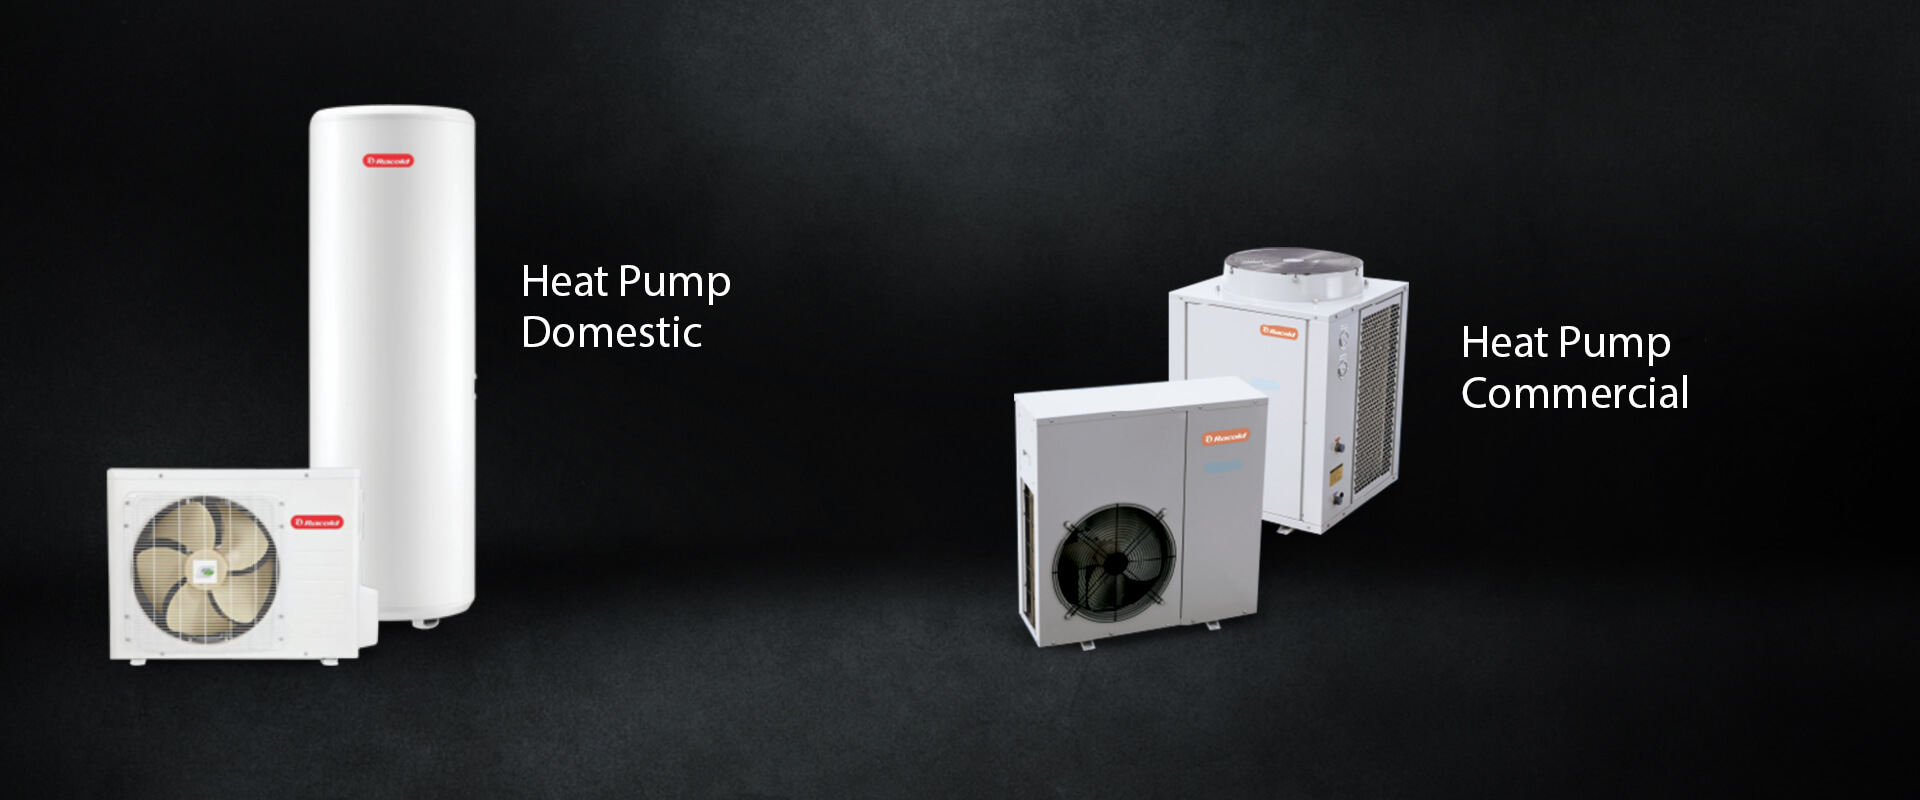 Best Commercial and Domestic Heat Pump in India